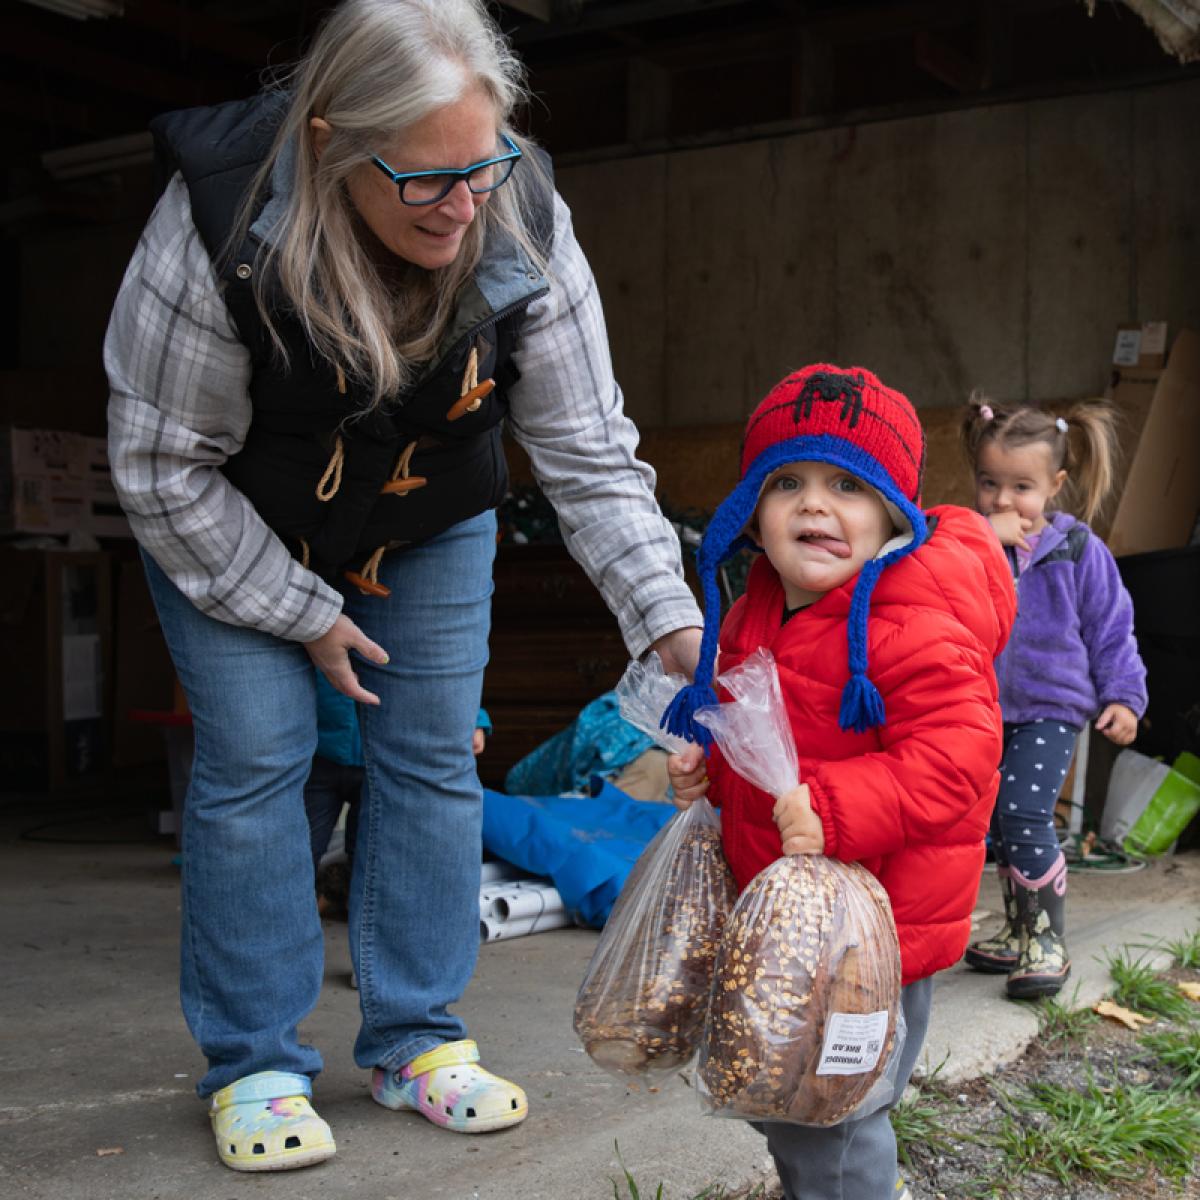 Laura Butler encourages one of the children as he carries loaves of bread from the farm truck to the neighborhood CSA pickup table.